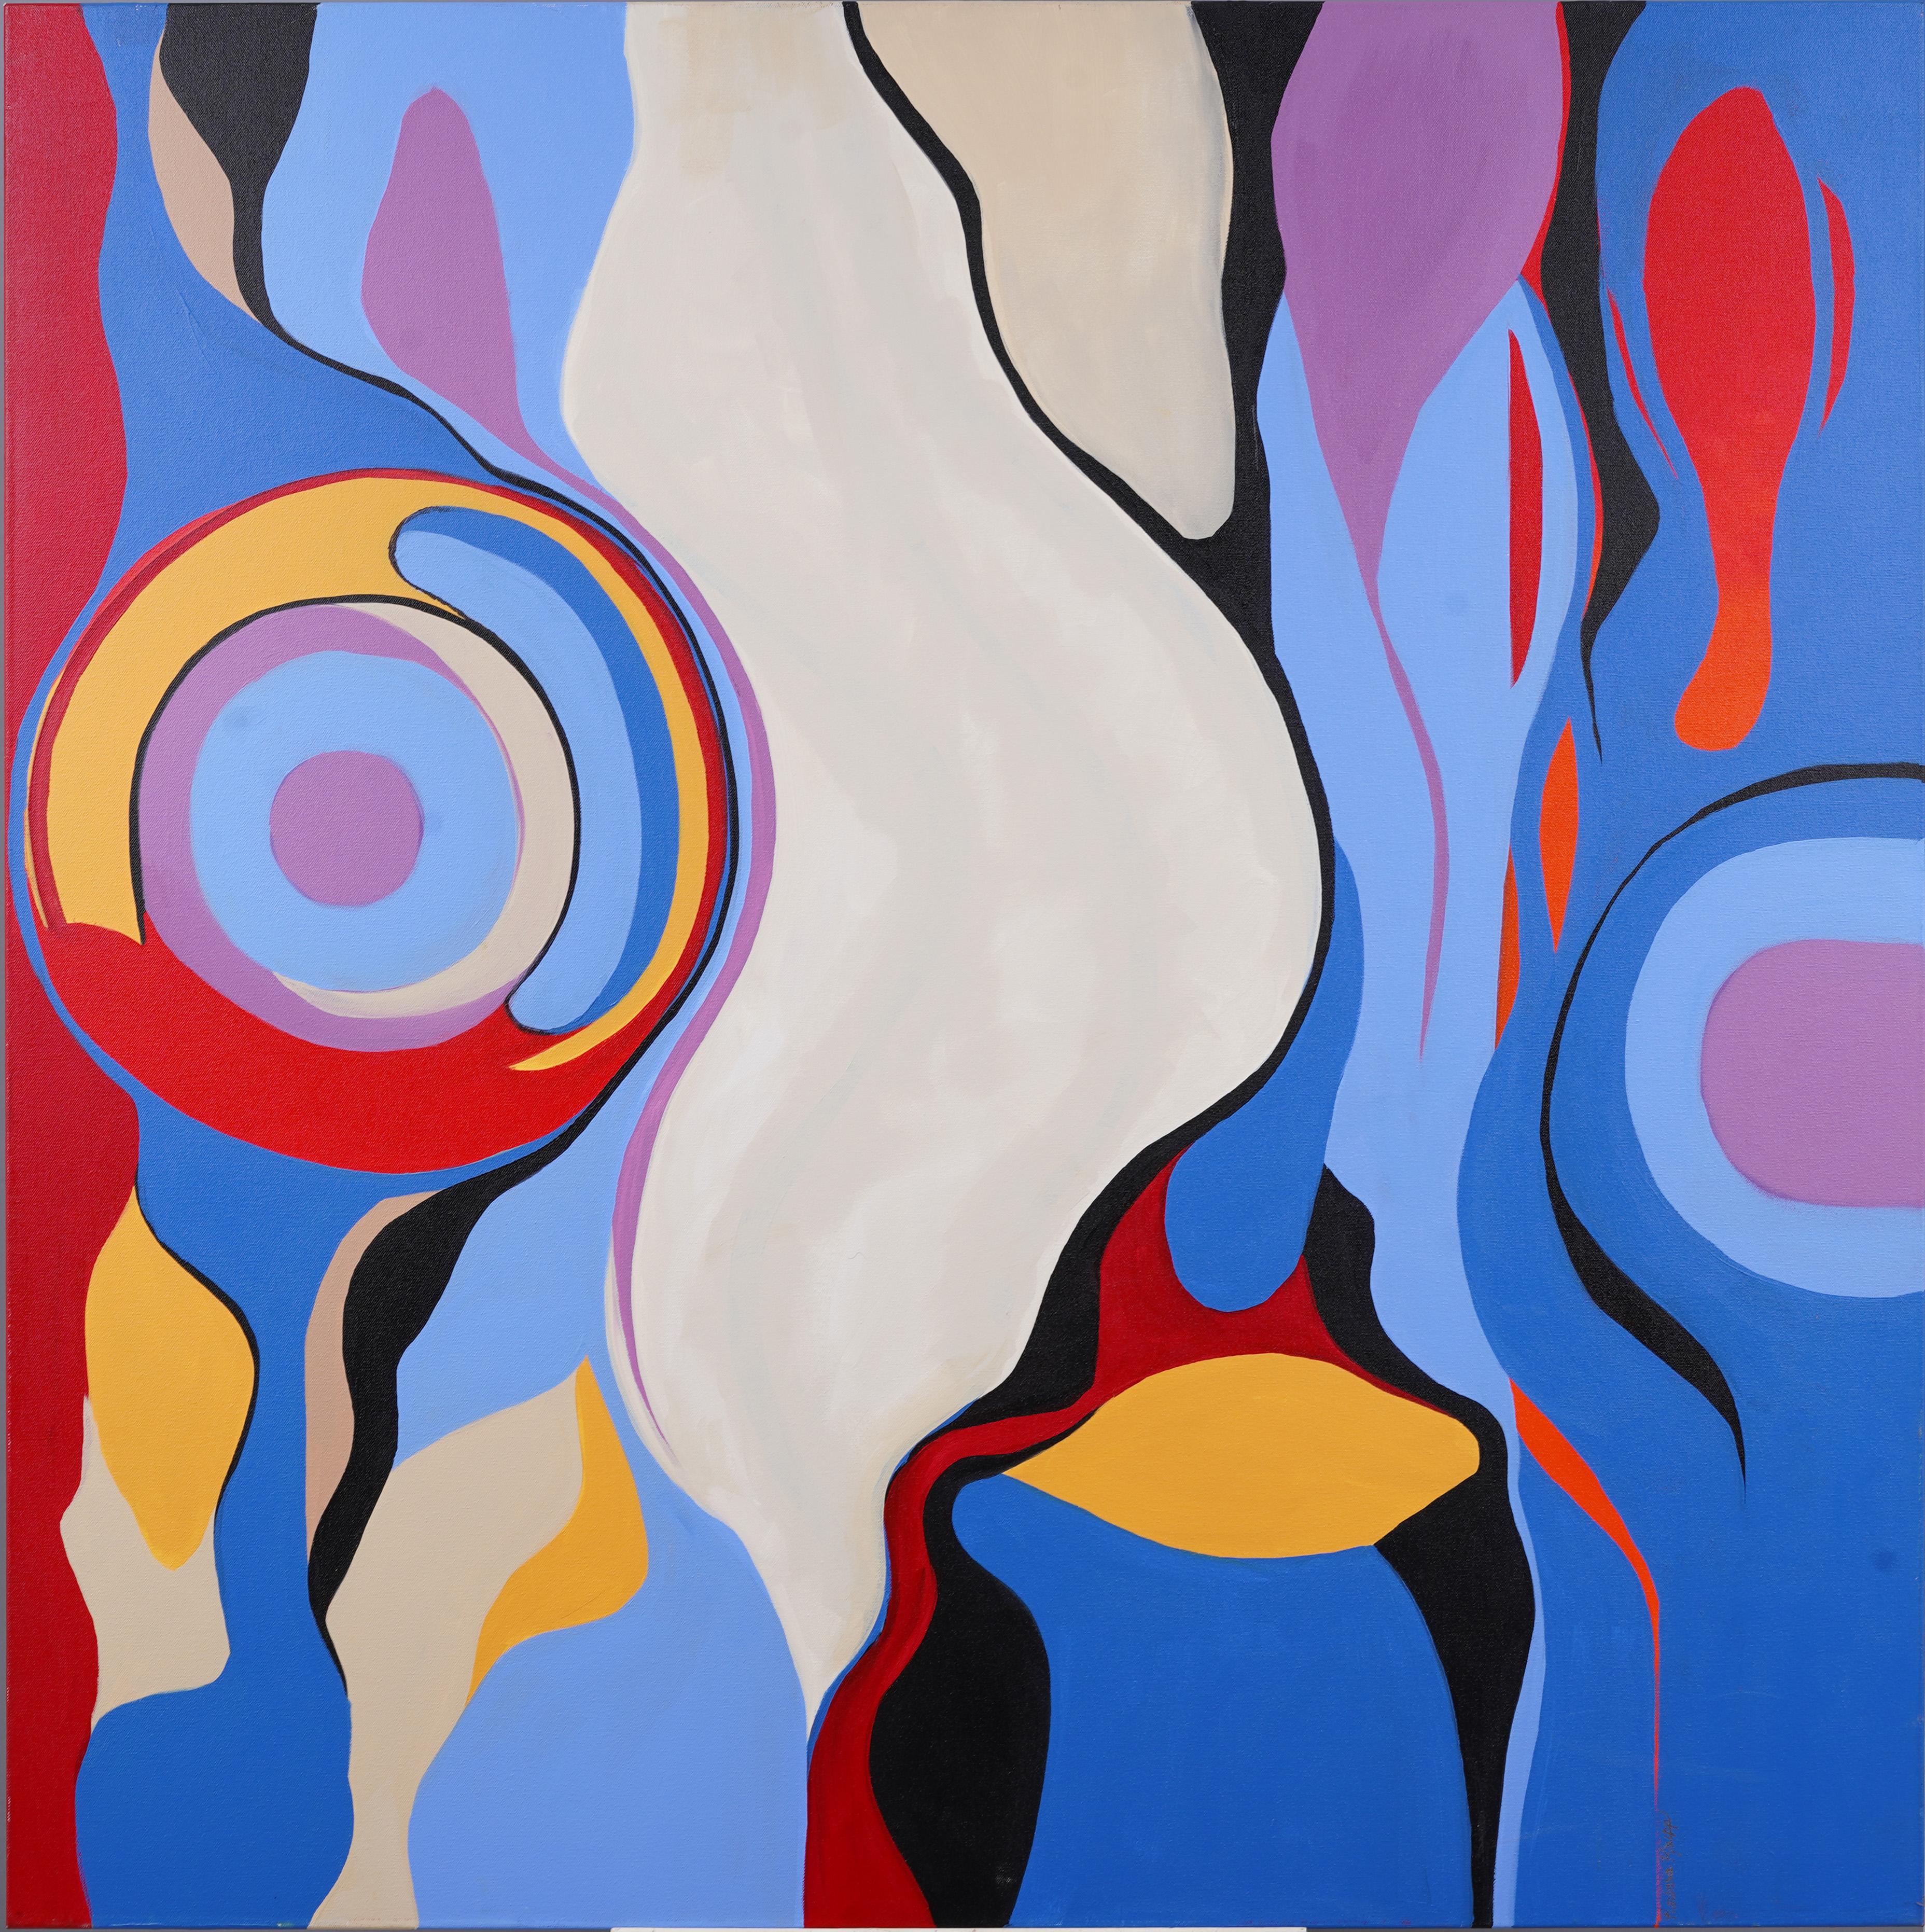 Large and impressive modernist painting by Barbara Krupp. An important and well listed artist. Great color and movement in this painting. Oil on canvas. Signed.
